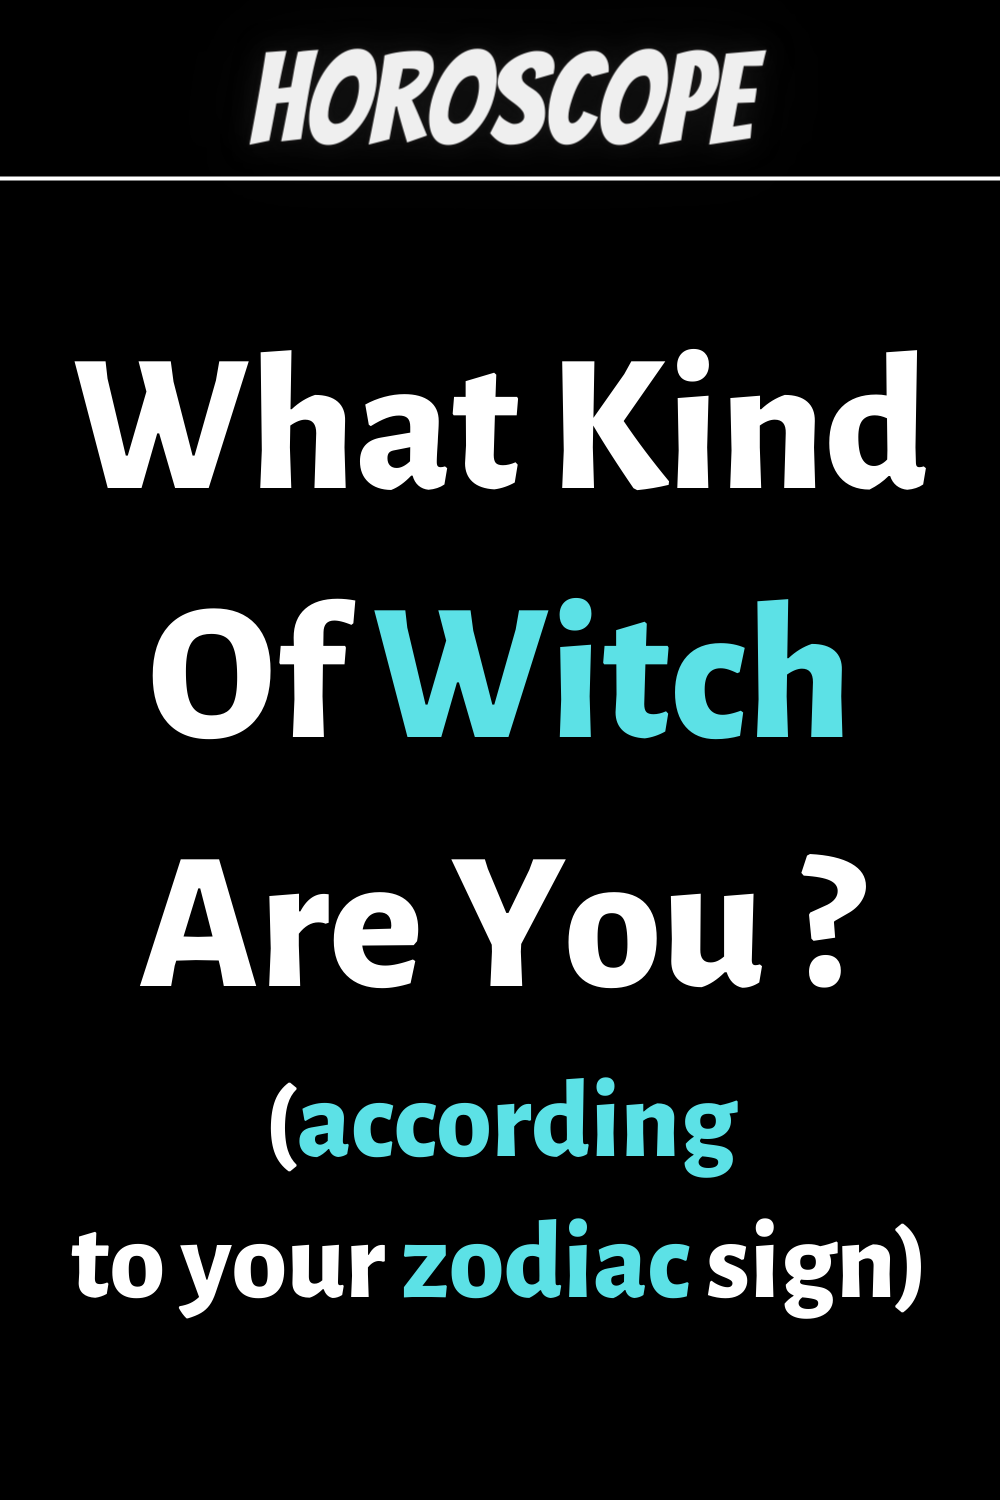 What Kind Of Witch Are You Based On Your Zodiac Sign?